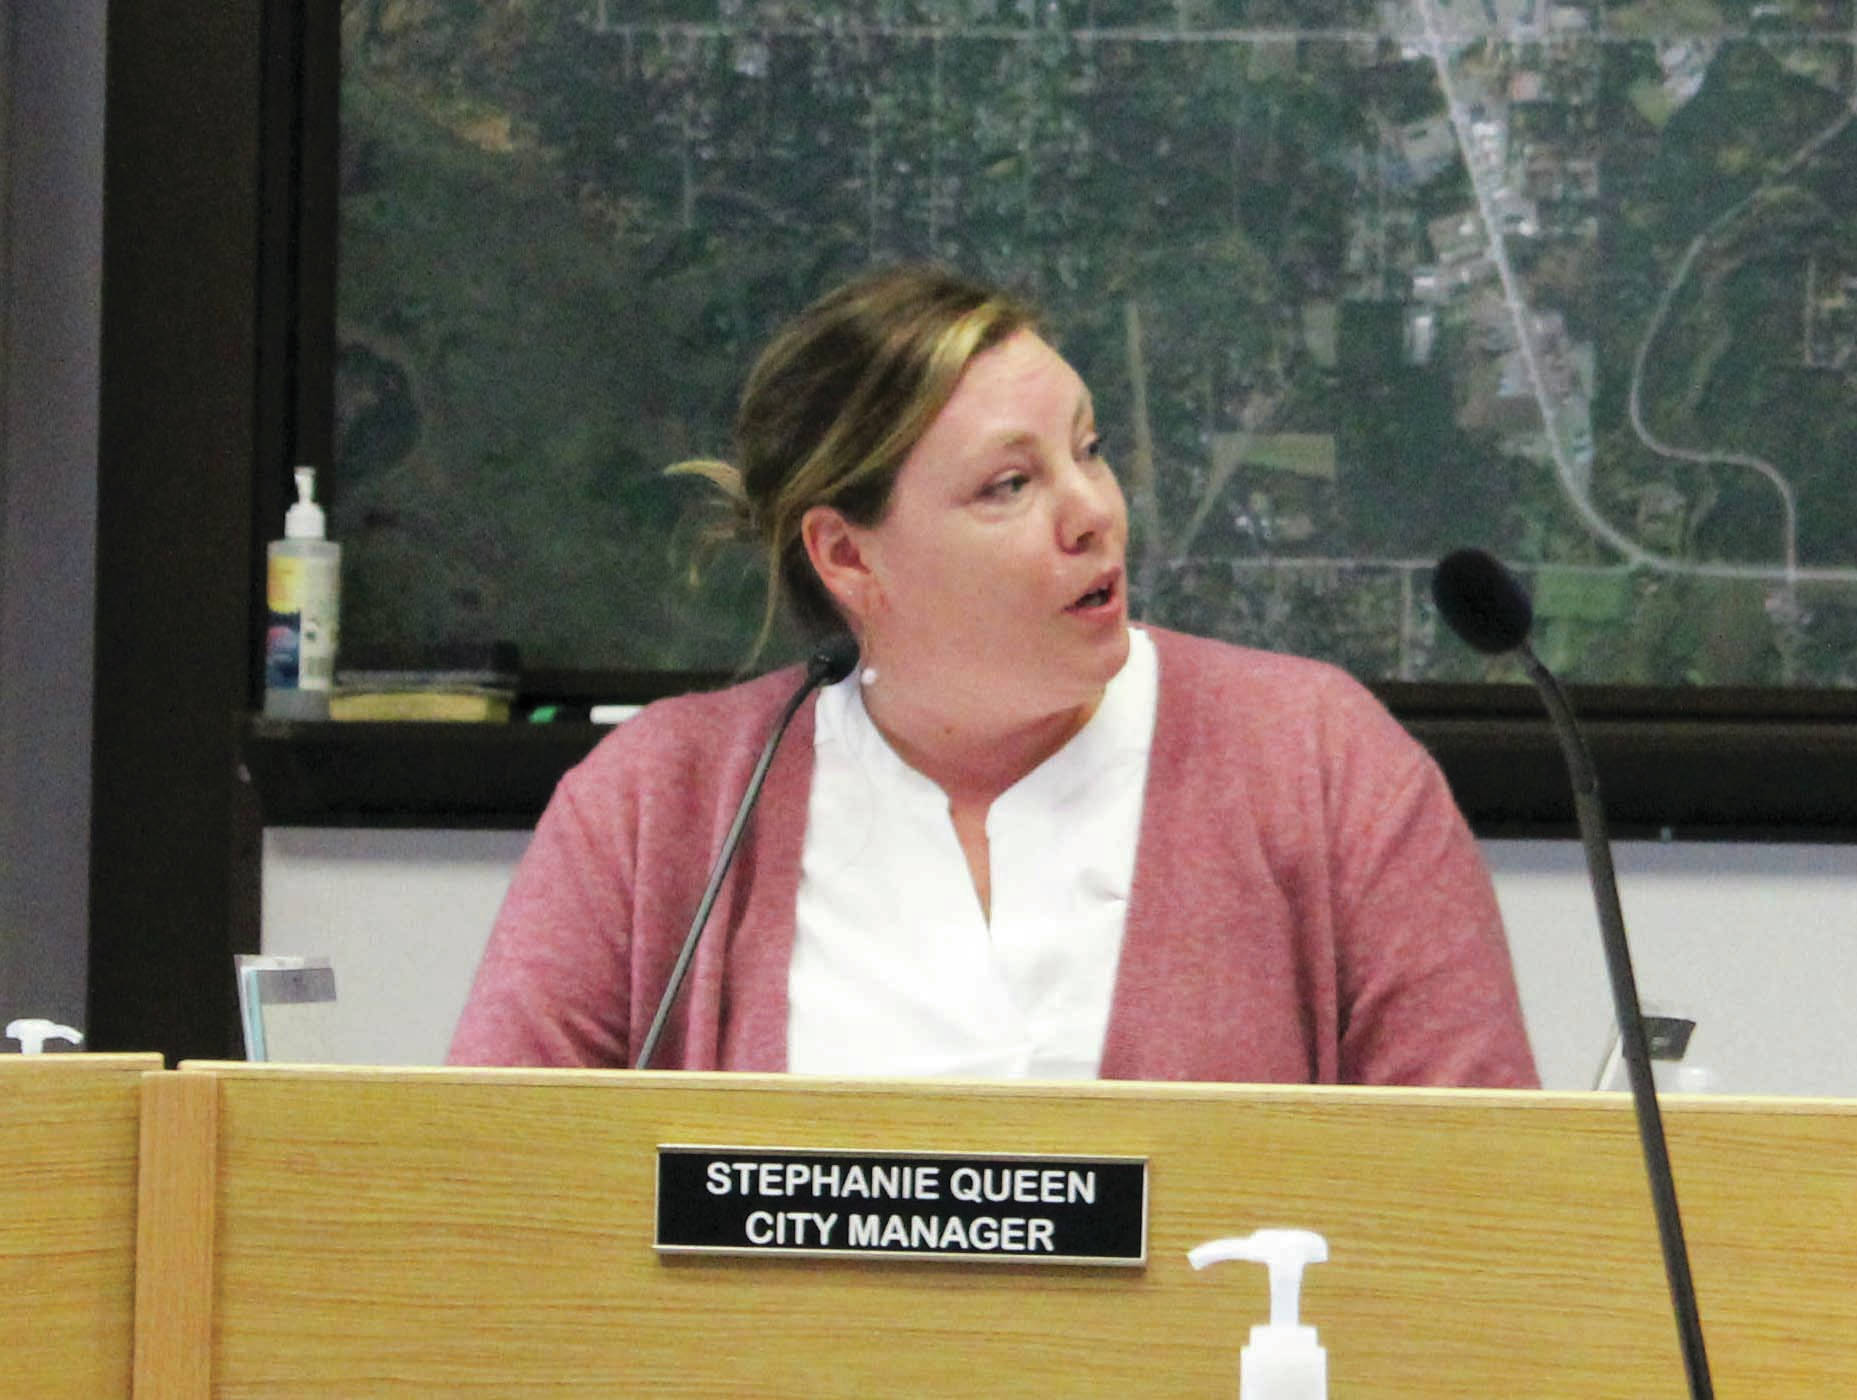 Stephanie Queen speaks during a meeting of the Soldotna City Council on Wednesday, July 28, 2021 in Soldotna, Alaska. (Ashlyn O'Hara/Peninsula Clarion)